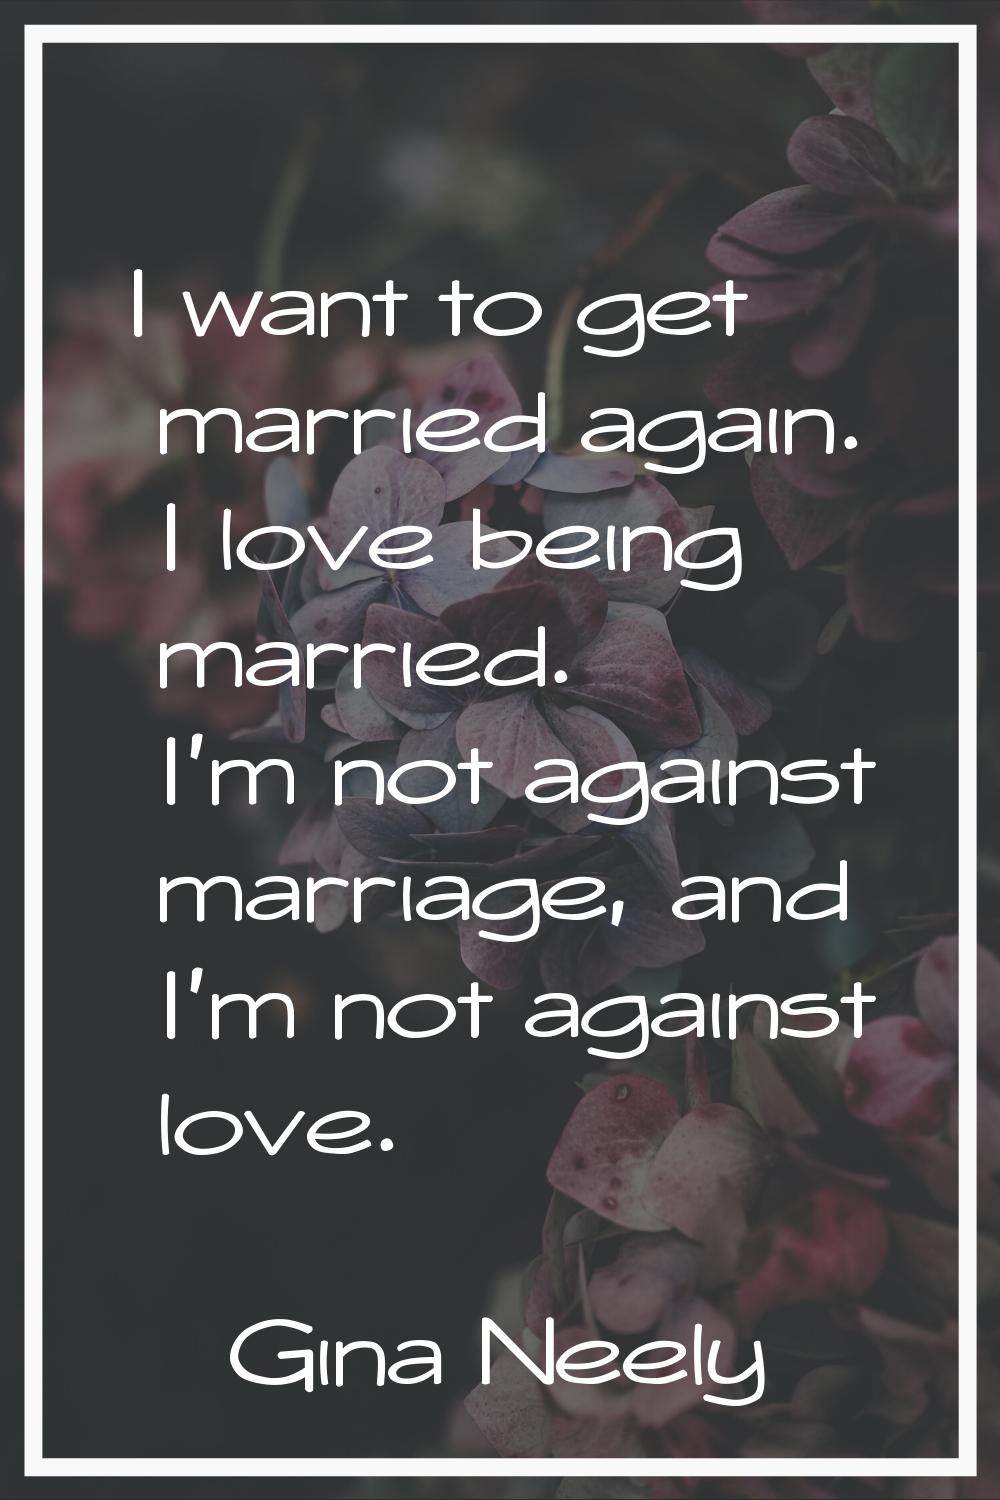 I want to get married again. I love being married. I'm not against marriage, and I'm not against lo